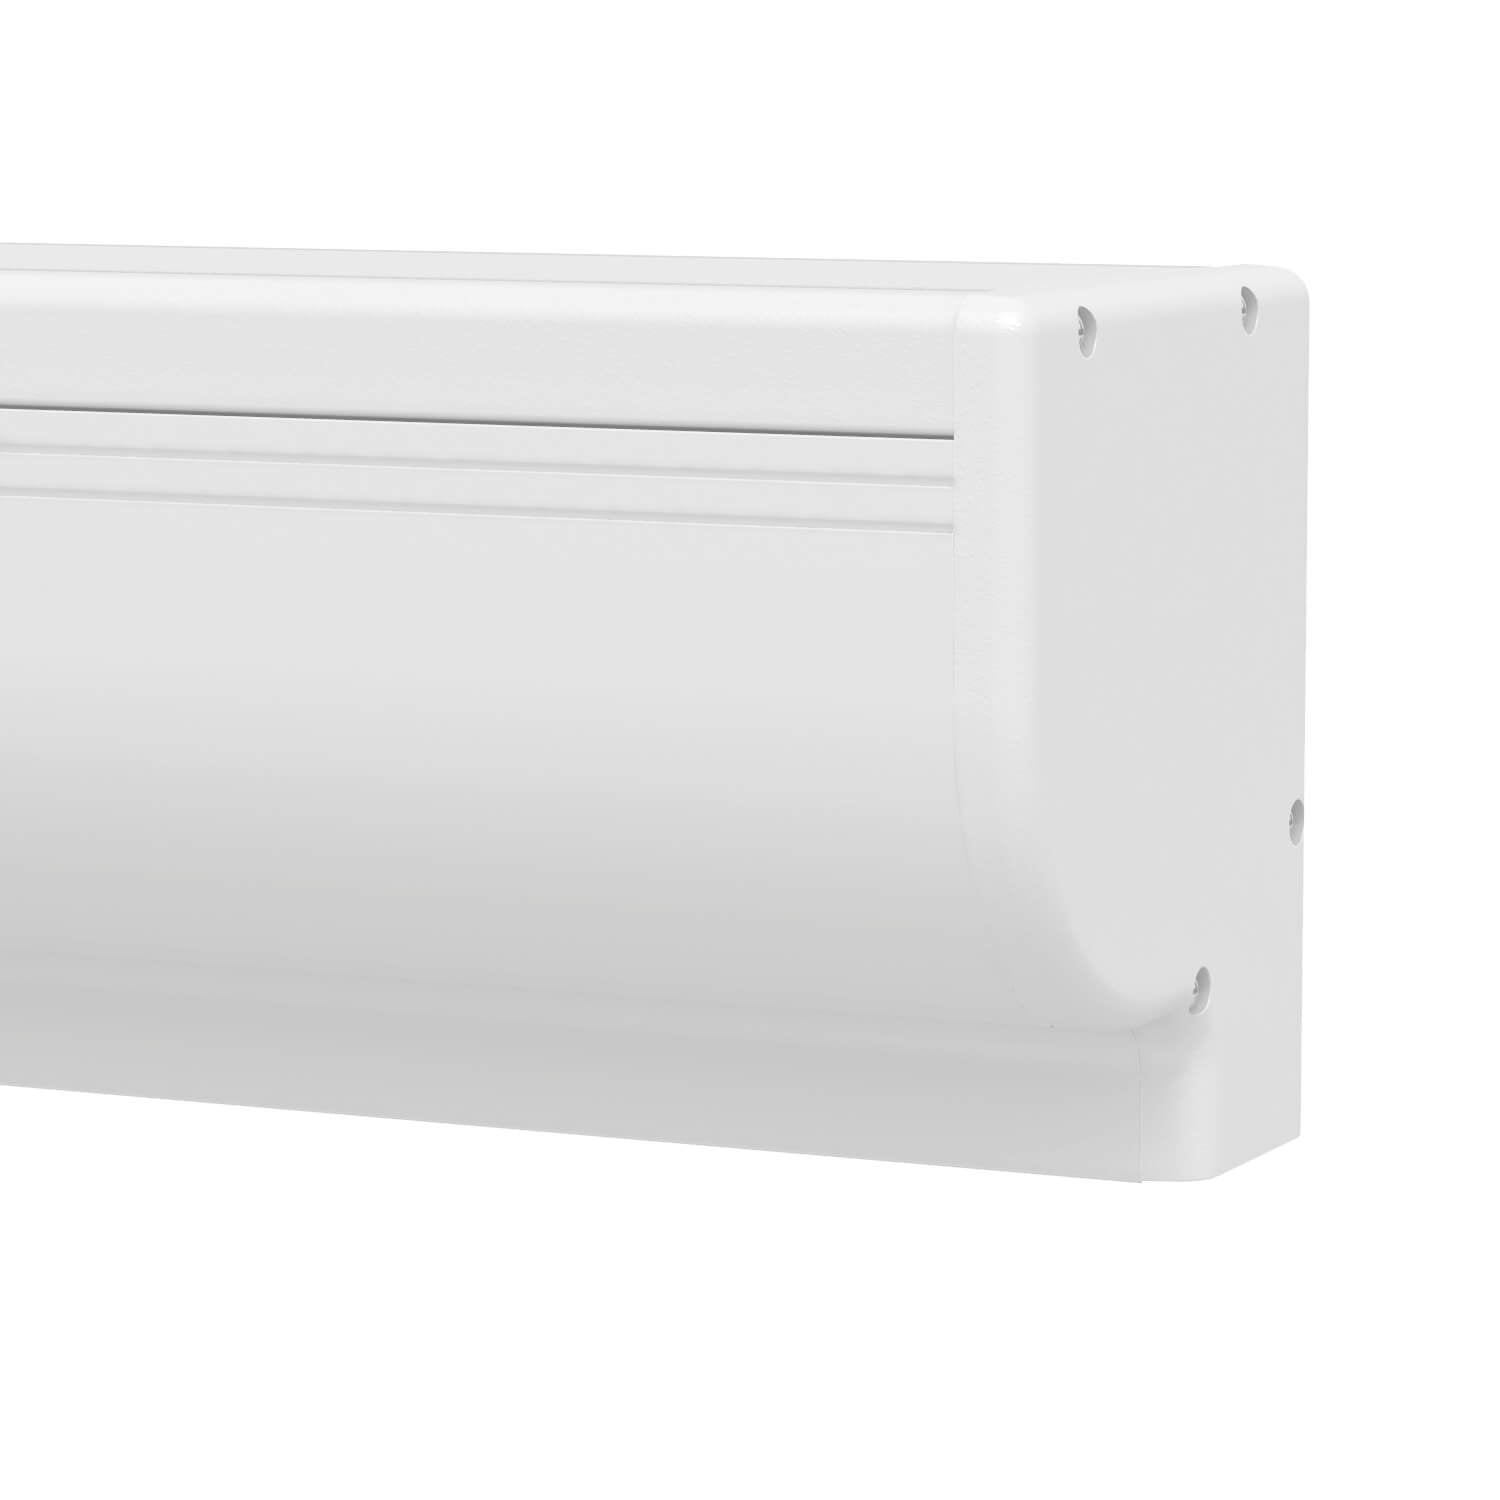 Da-Lite Tensioned Contour Electrol - Wall or Ceiling Mounted Electric Screen, white case